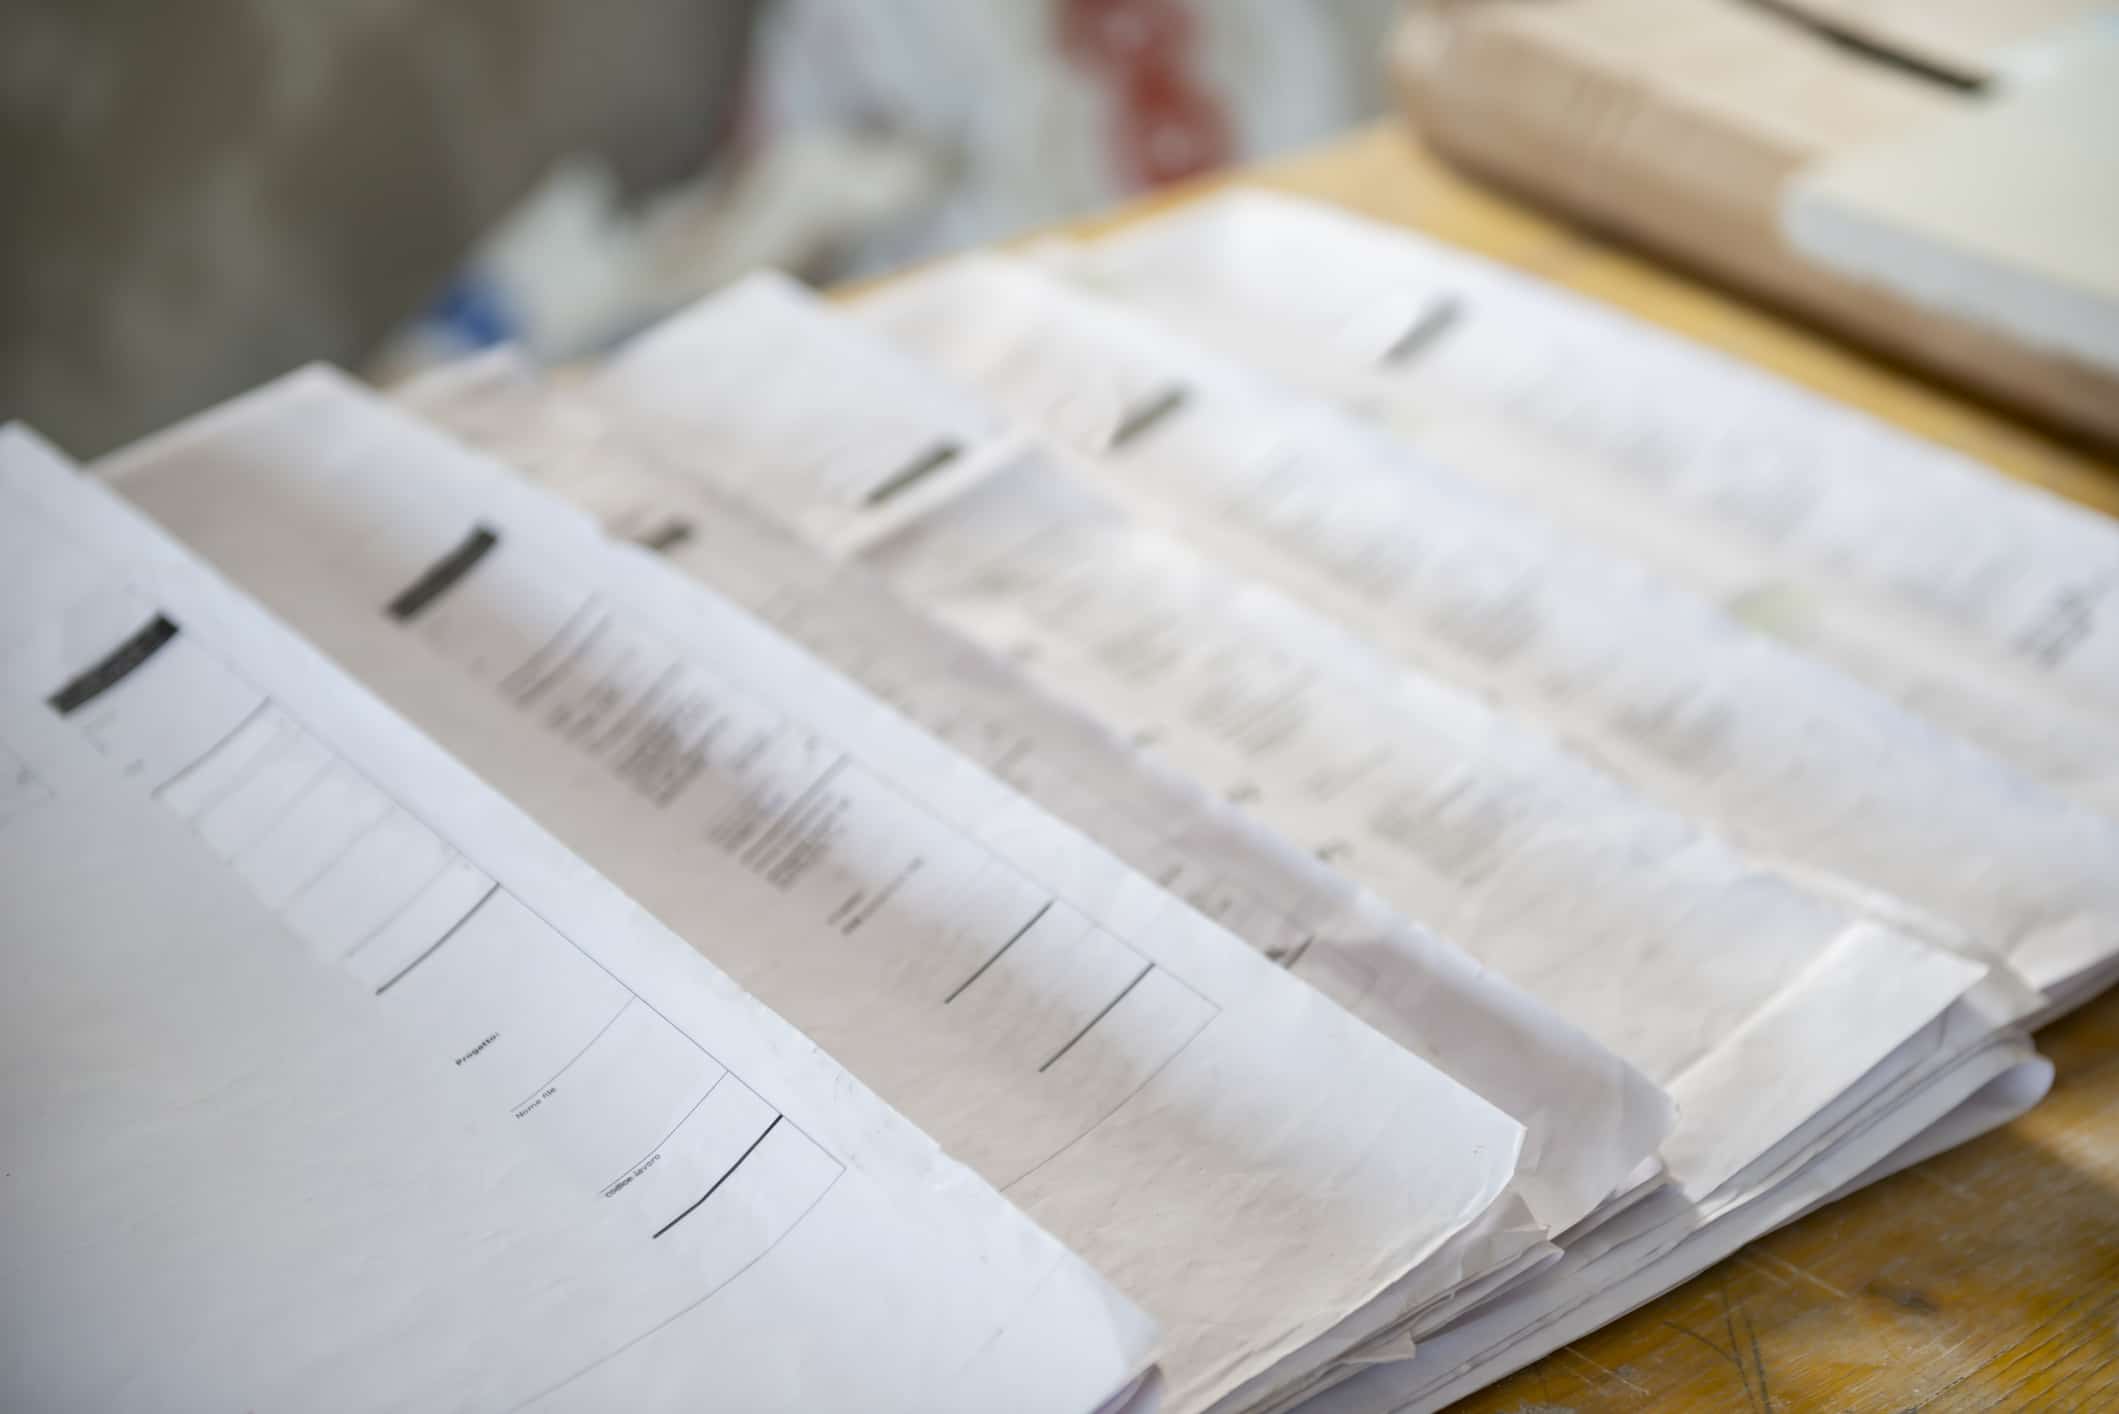 Construction take offs can involve a lot of paperwork--but they don't have to.